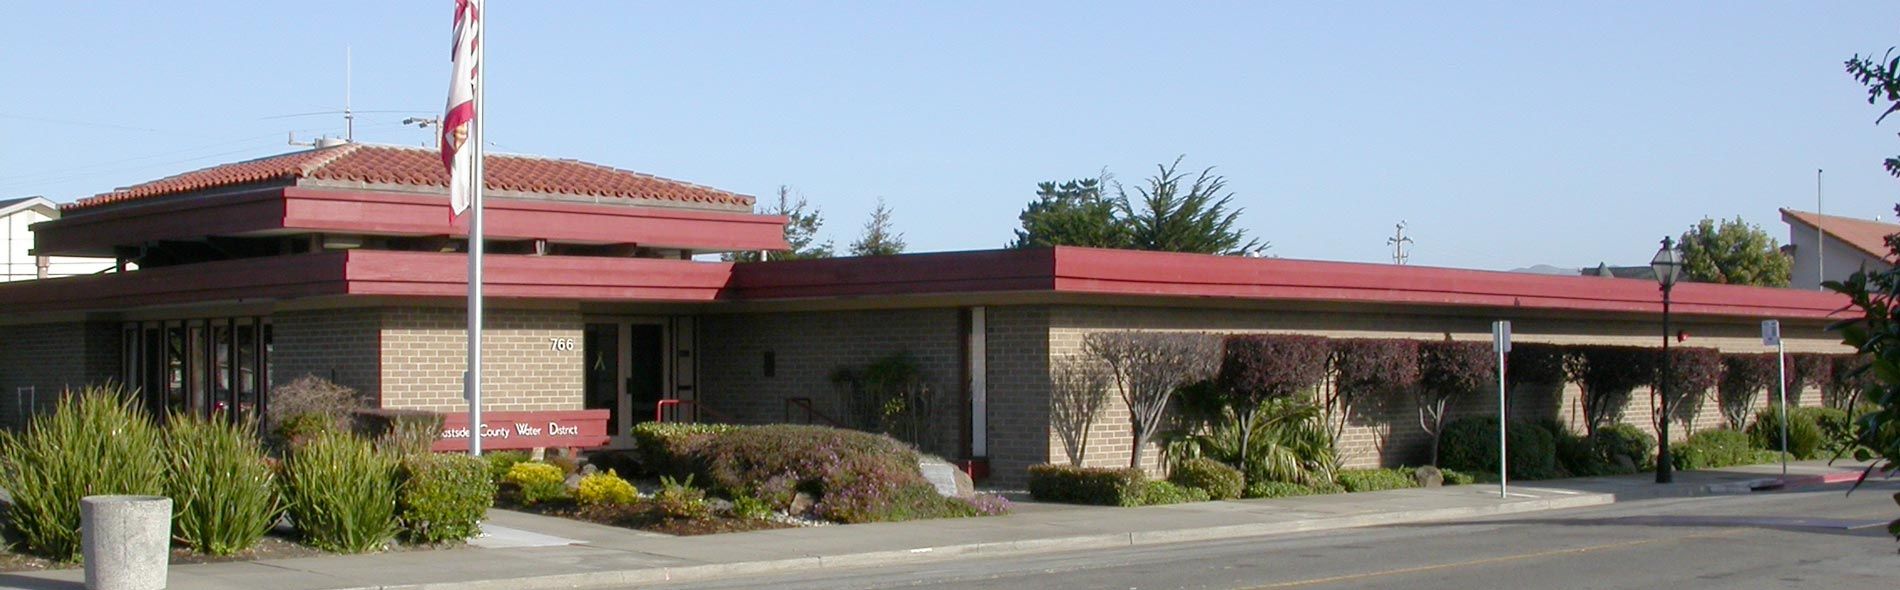 Coastside County Water District offices